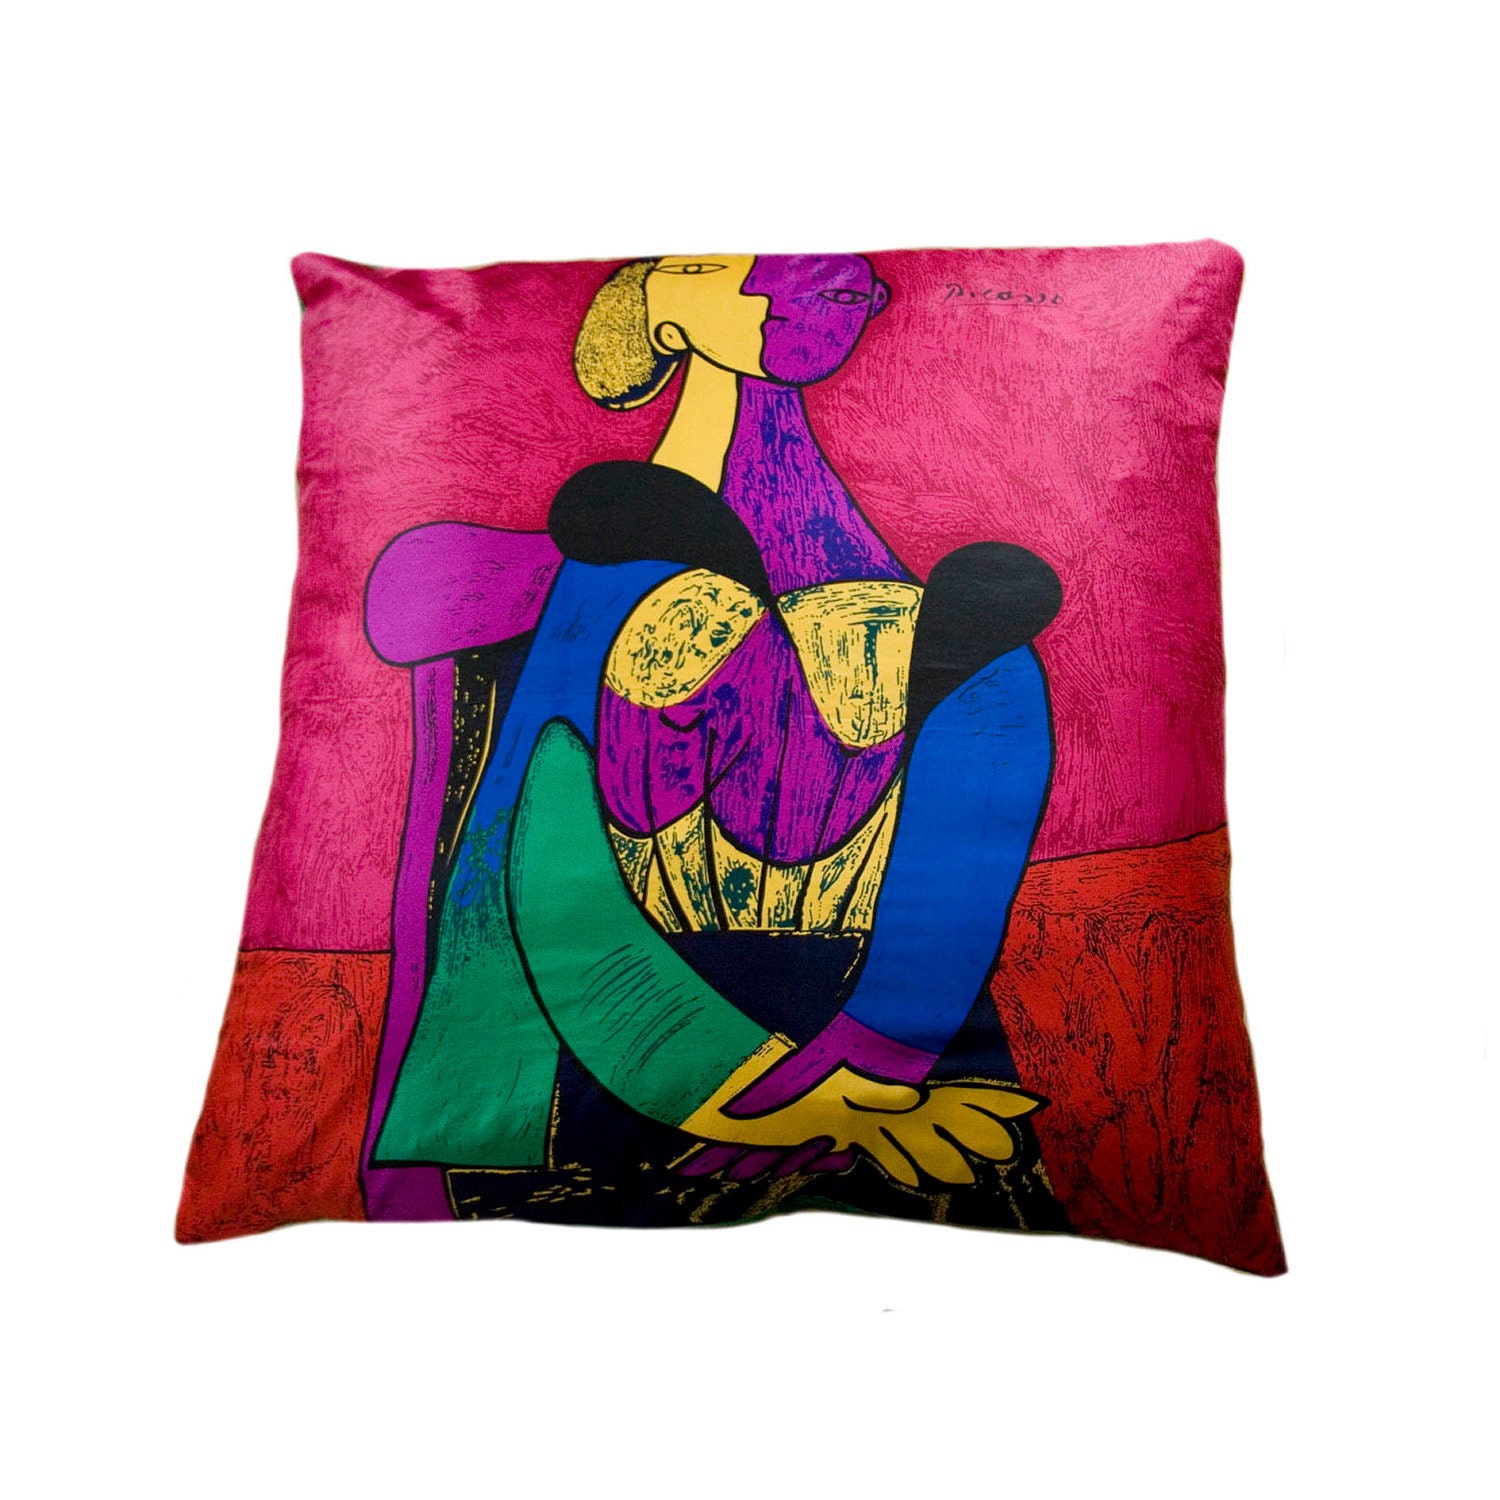 Vintage Silk Cushion Picasso Modern Art Very Large Floor Cushion Cover made from Vintage Silk Twill Scarf